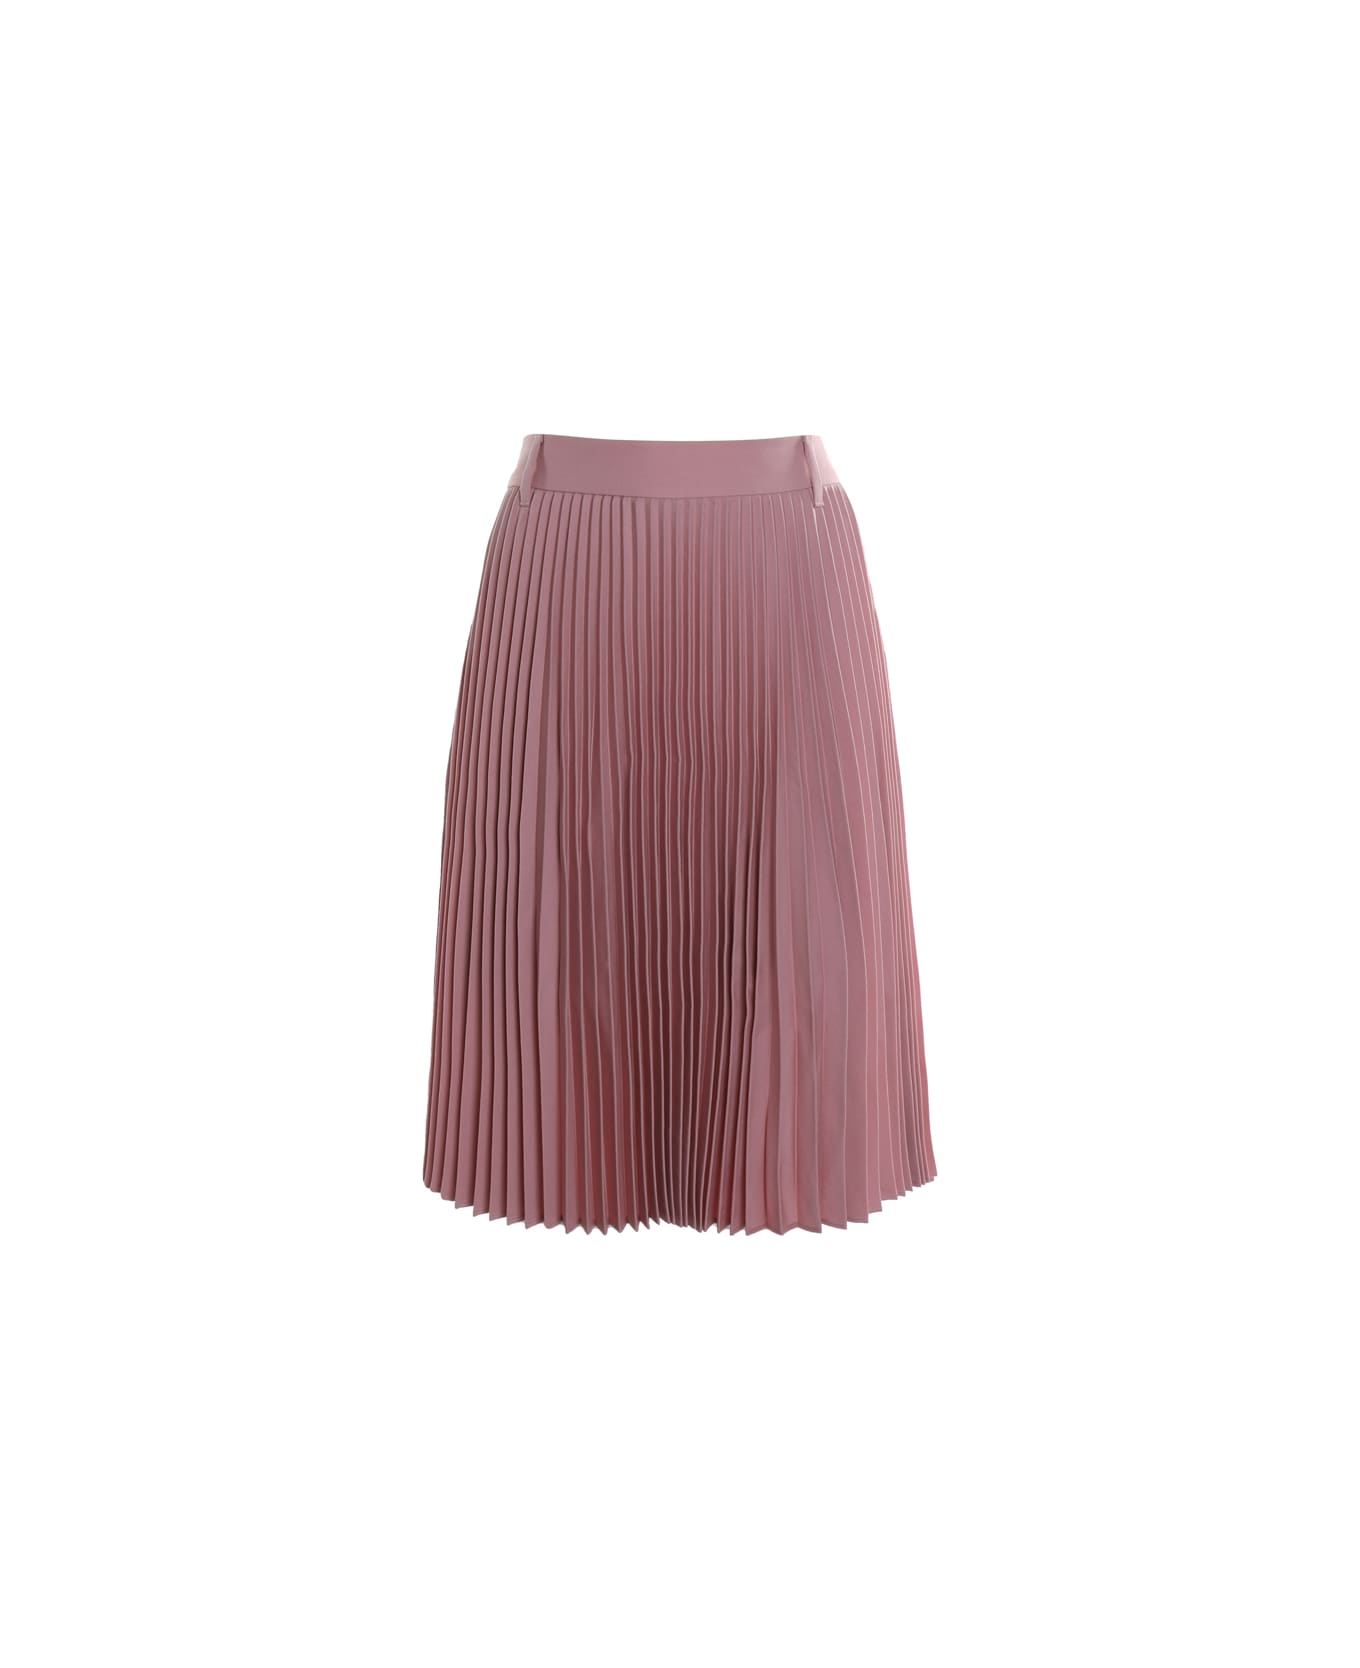 Burberry Skirt With Shorts With Pleated Detail - Rosy pink スカート